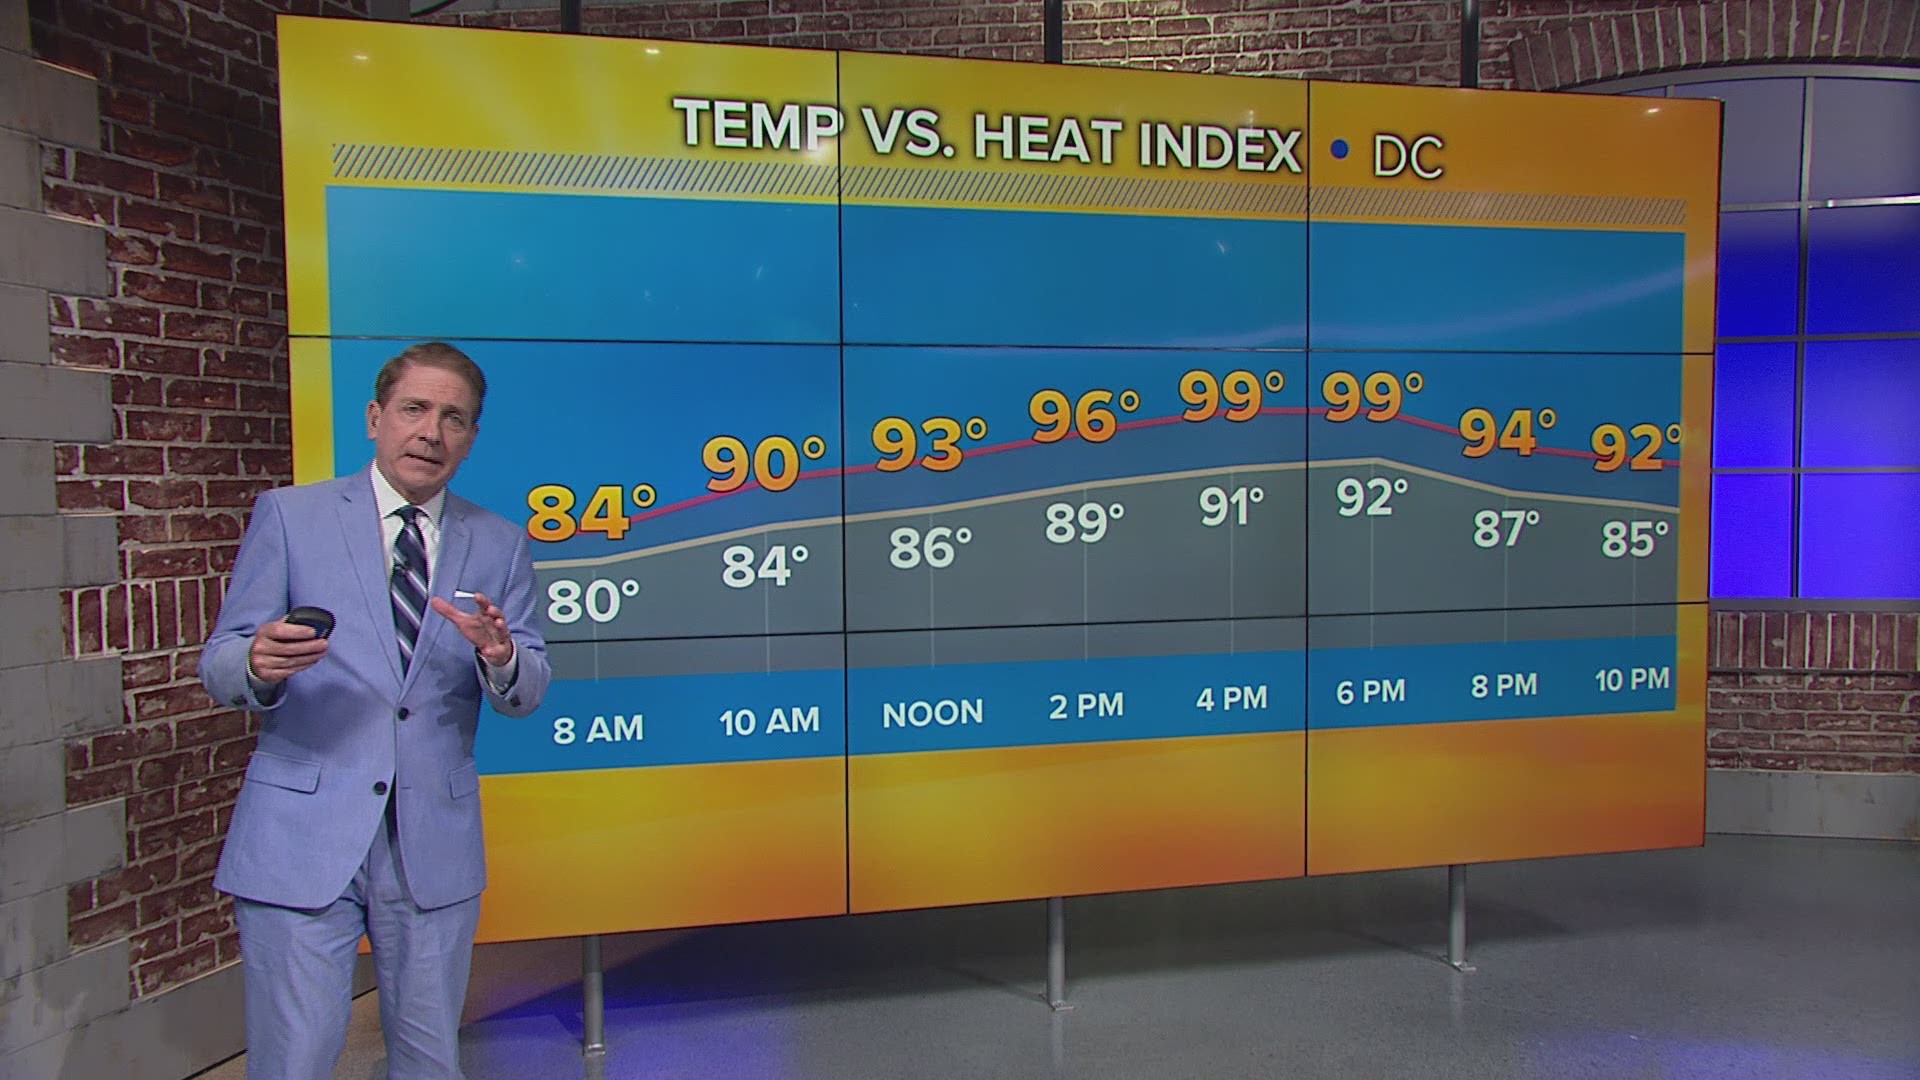 Hottest weather of the summer will occur this week with temperatures reaching 100 degrees.